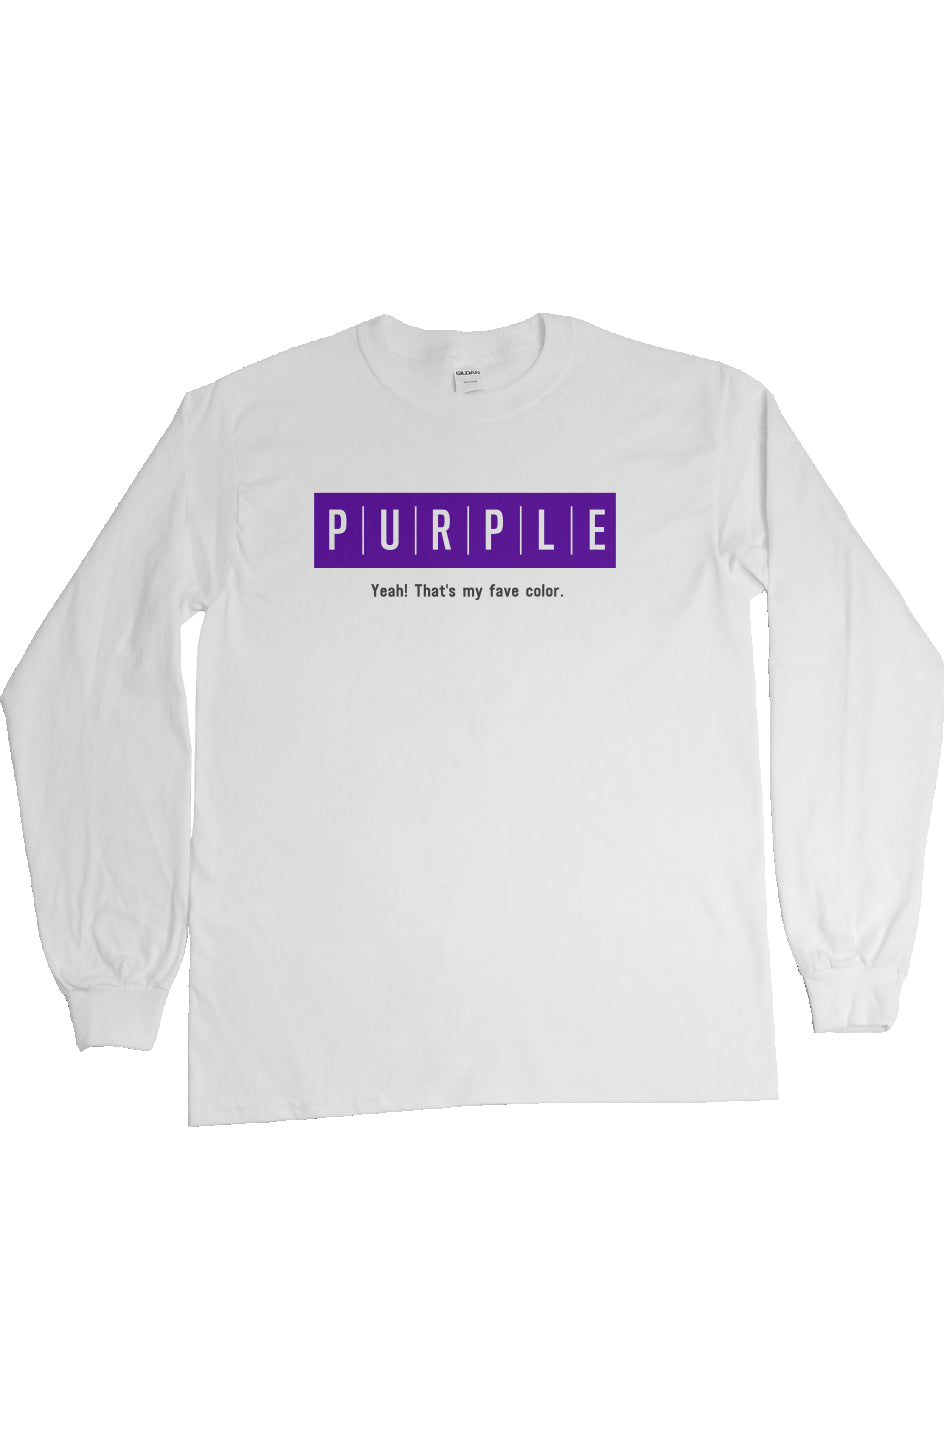 Purple Collection Fave long sleeve